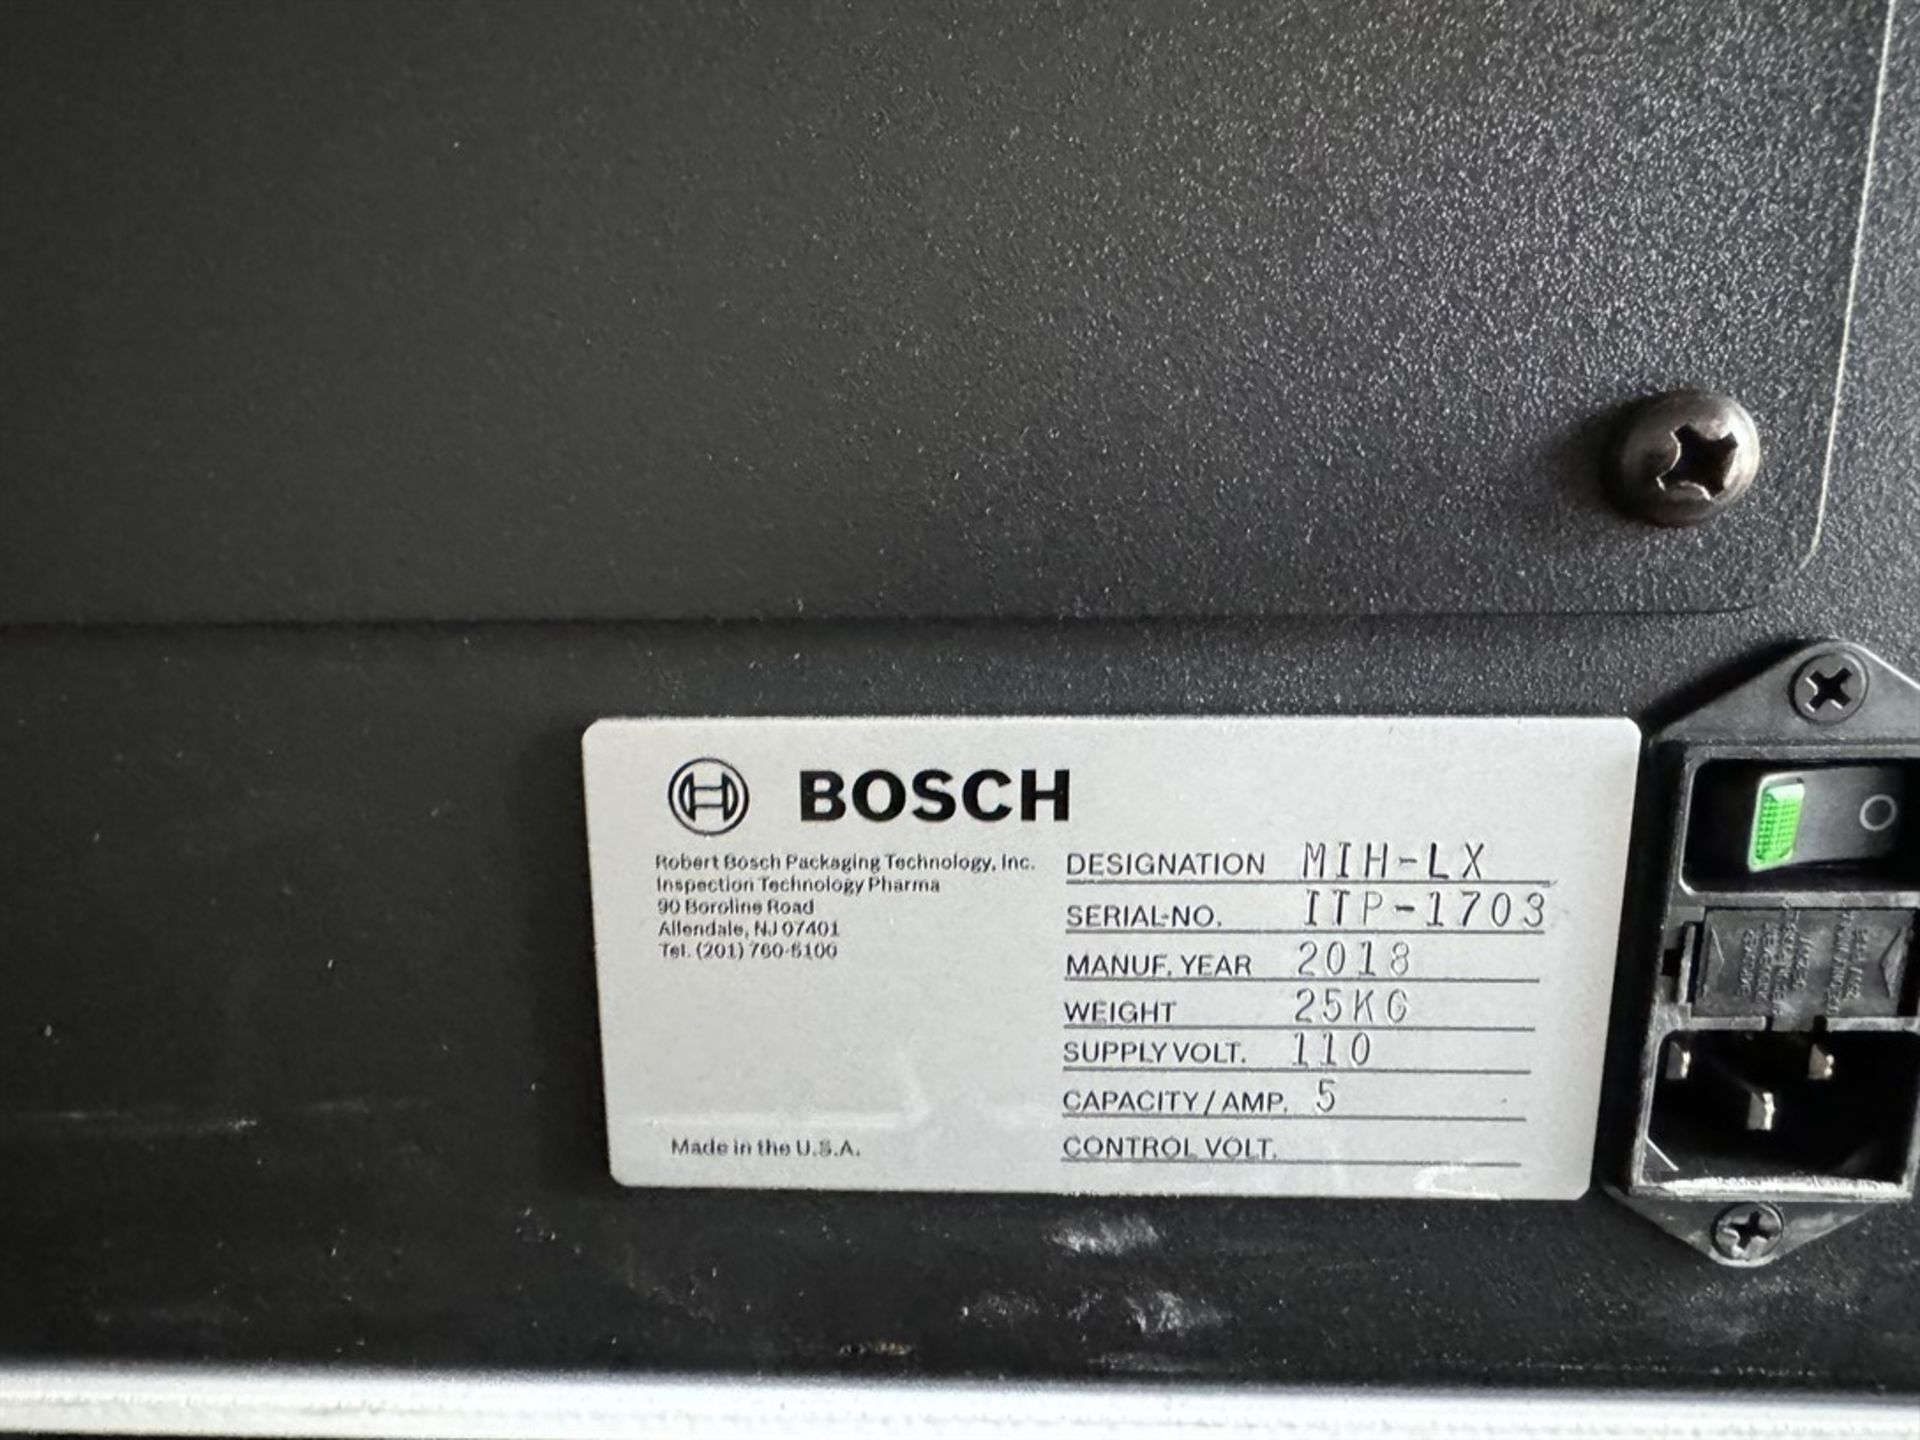 2016 BOSCH MIH-LX Manual Inspection Hood, s/n ITP-1703 - Image 4 of 4